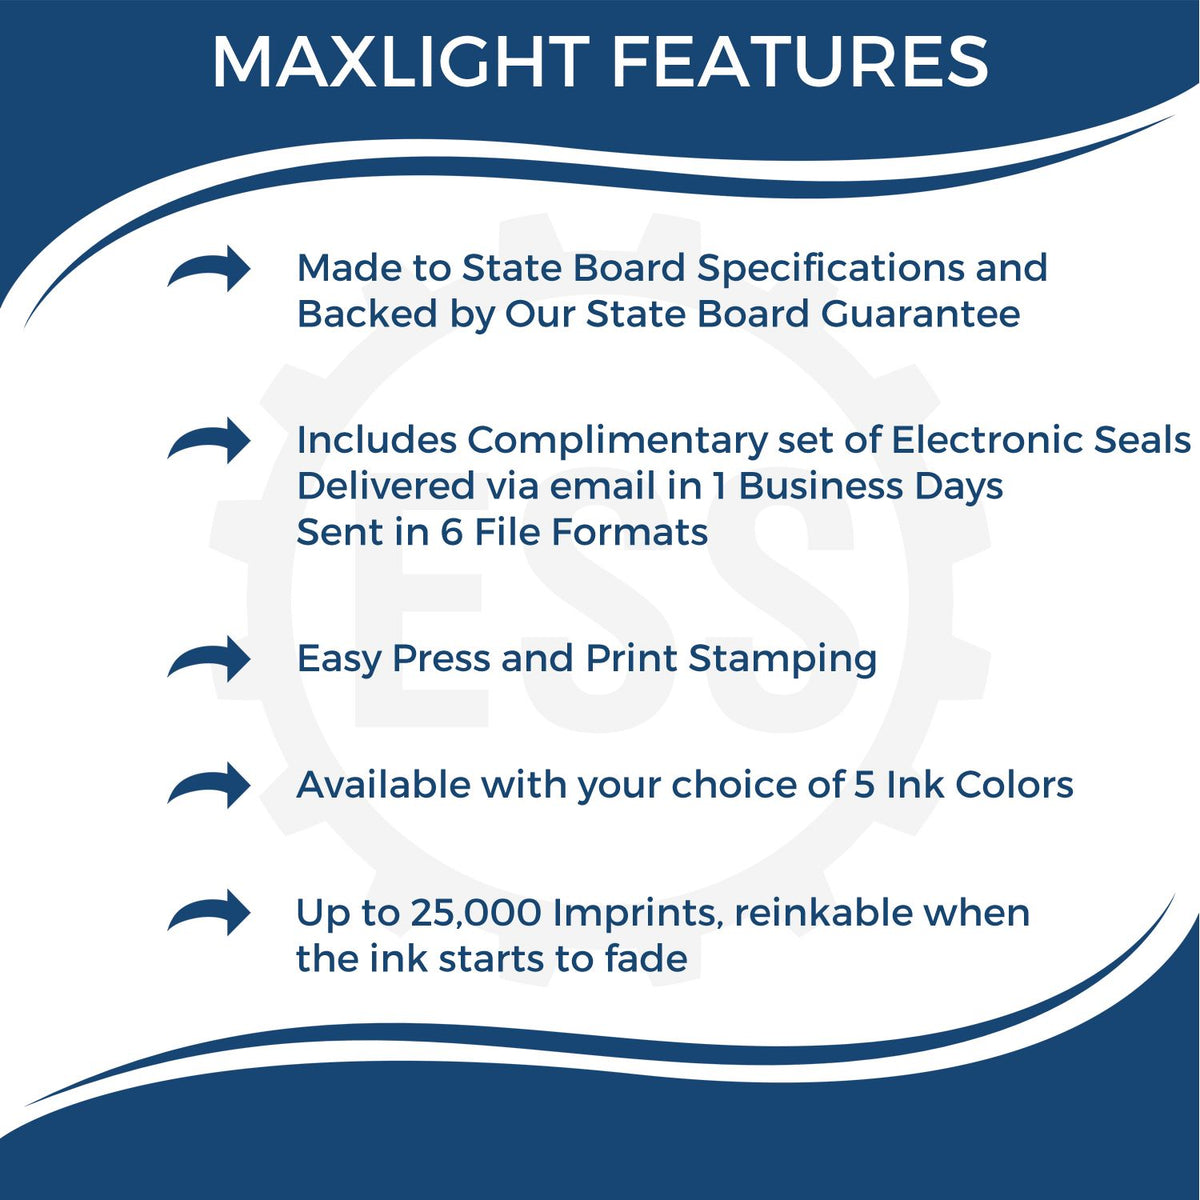 A picture of an infographic highlighting the selling points for the Premium MaxLight Pre-Inked North Dakota Geology Stamp